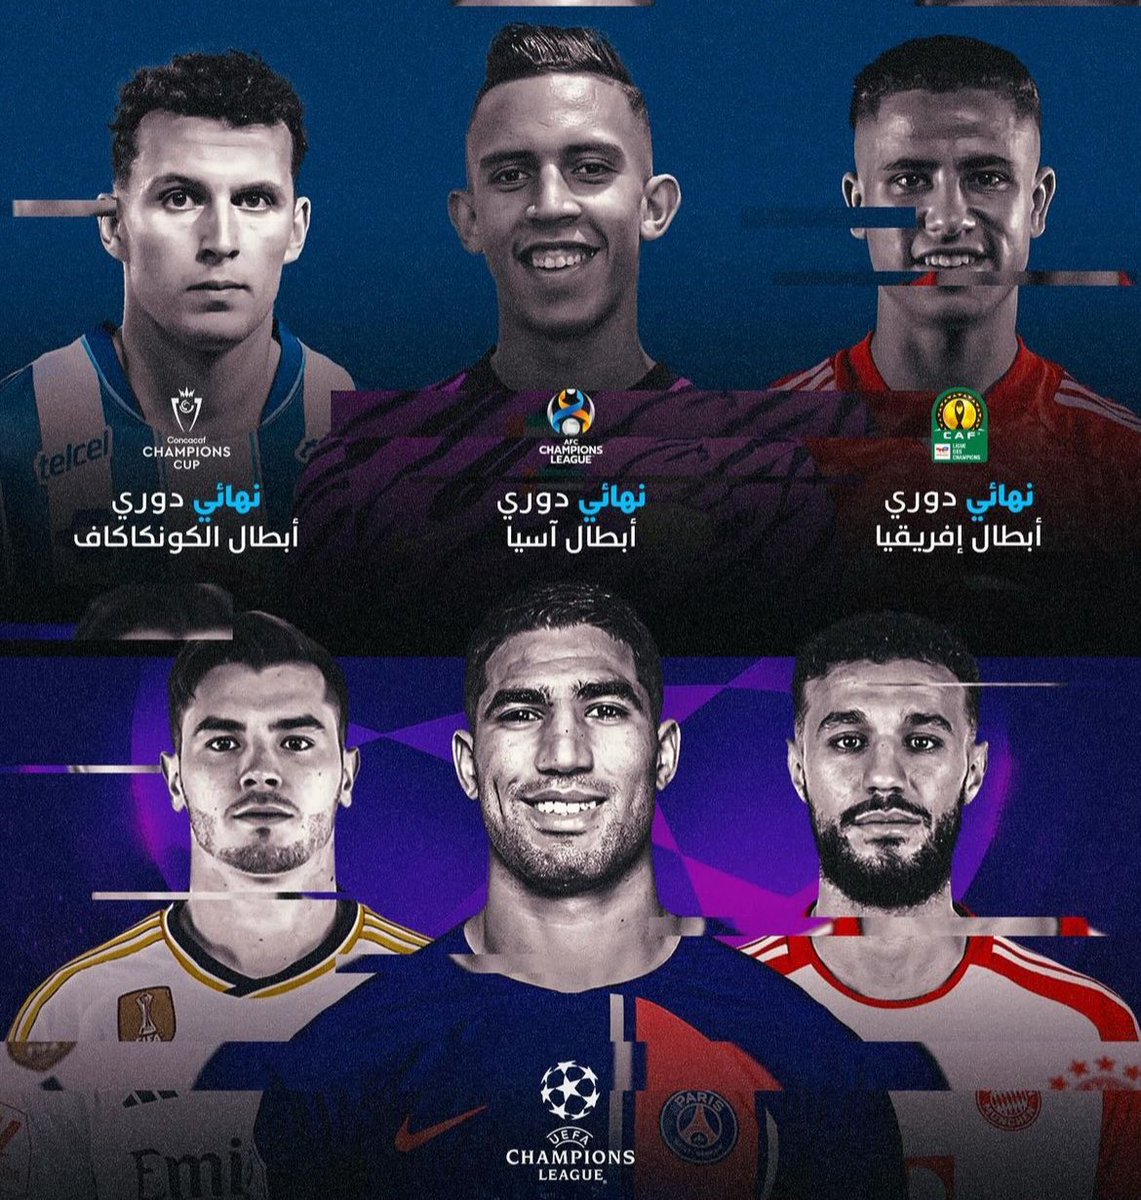 Morocco has a representative in each Champions League semifinal this season. 🇲🇦🤯

— Concacaf
— Asia
— Europe
— Africa

#Morocco #DimaMaghrib #Africa #AfricanFootball